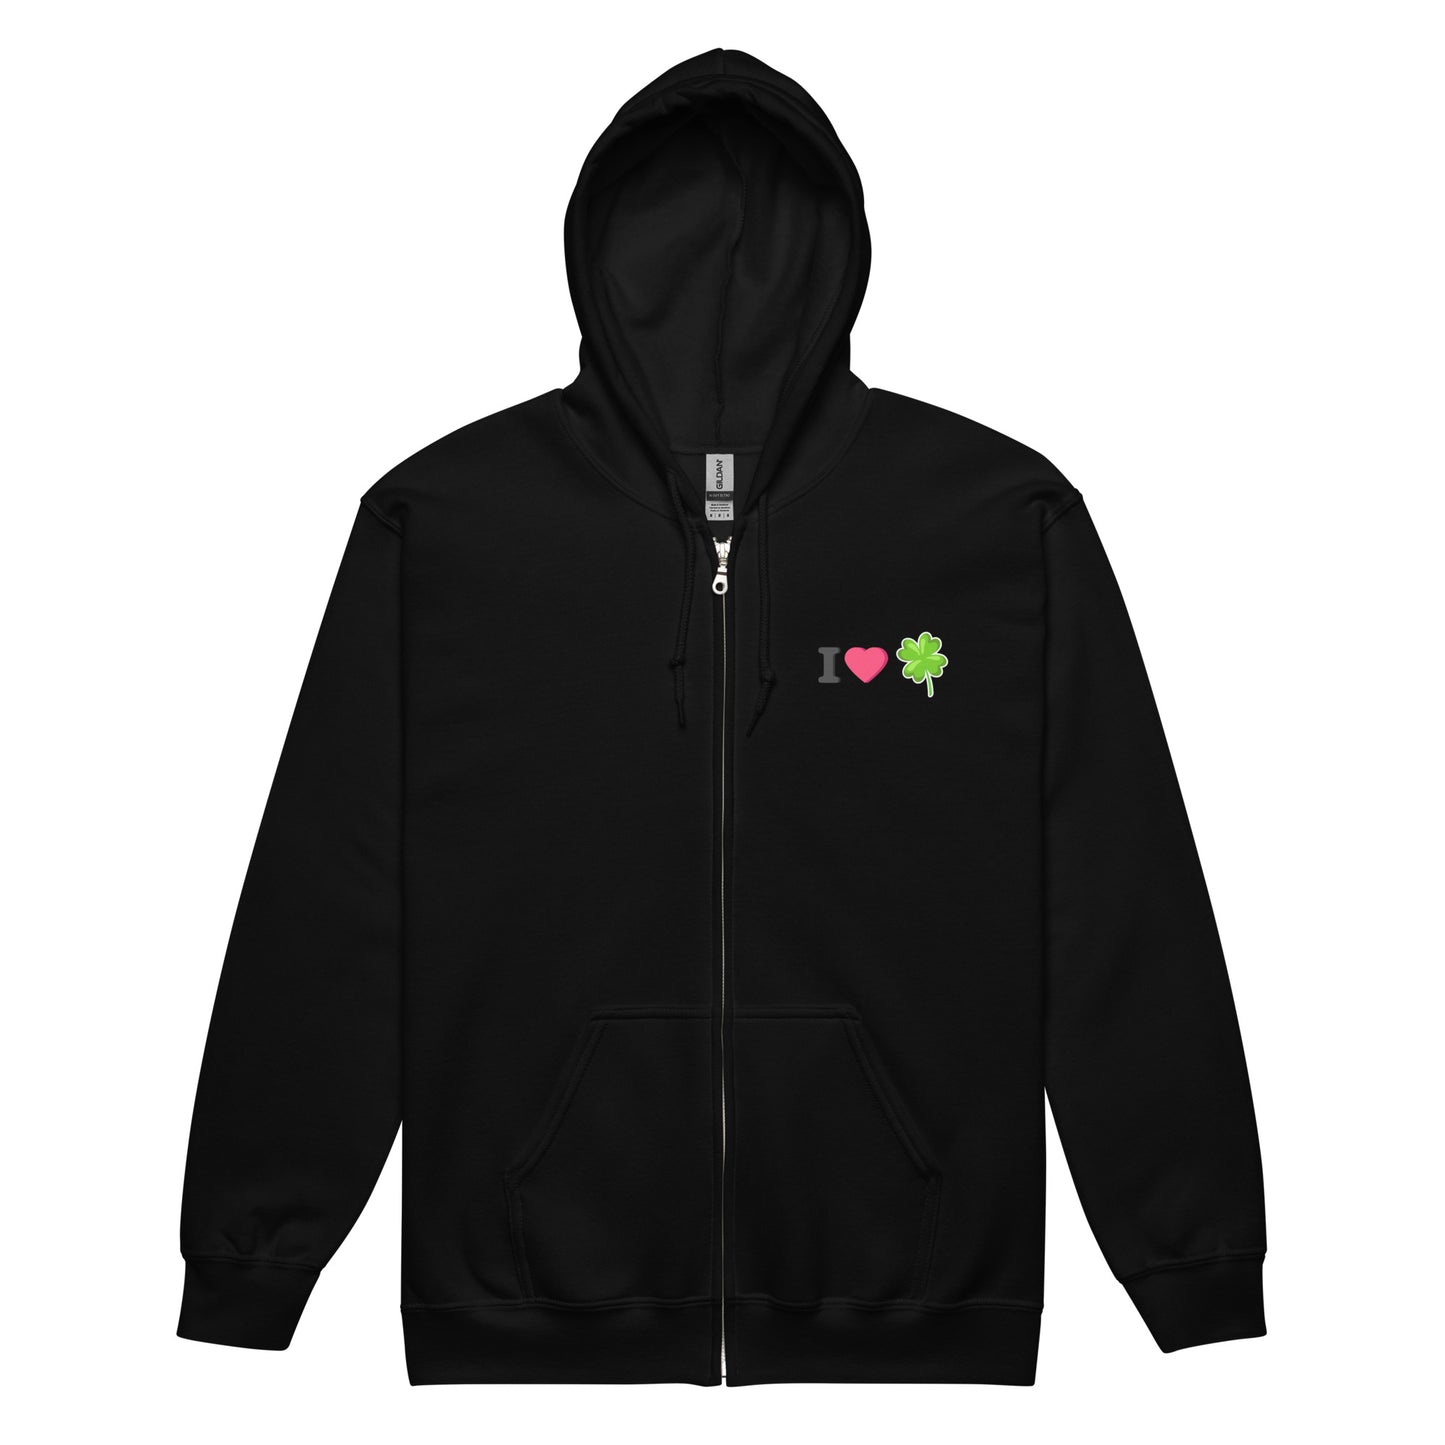 Unisex black graphic hoodie that says "I Love Luck"